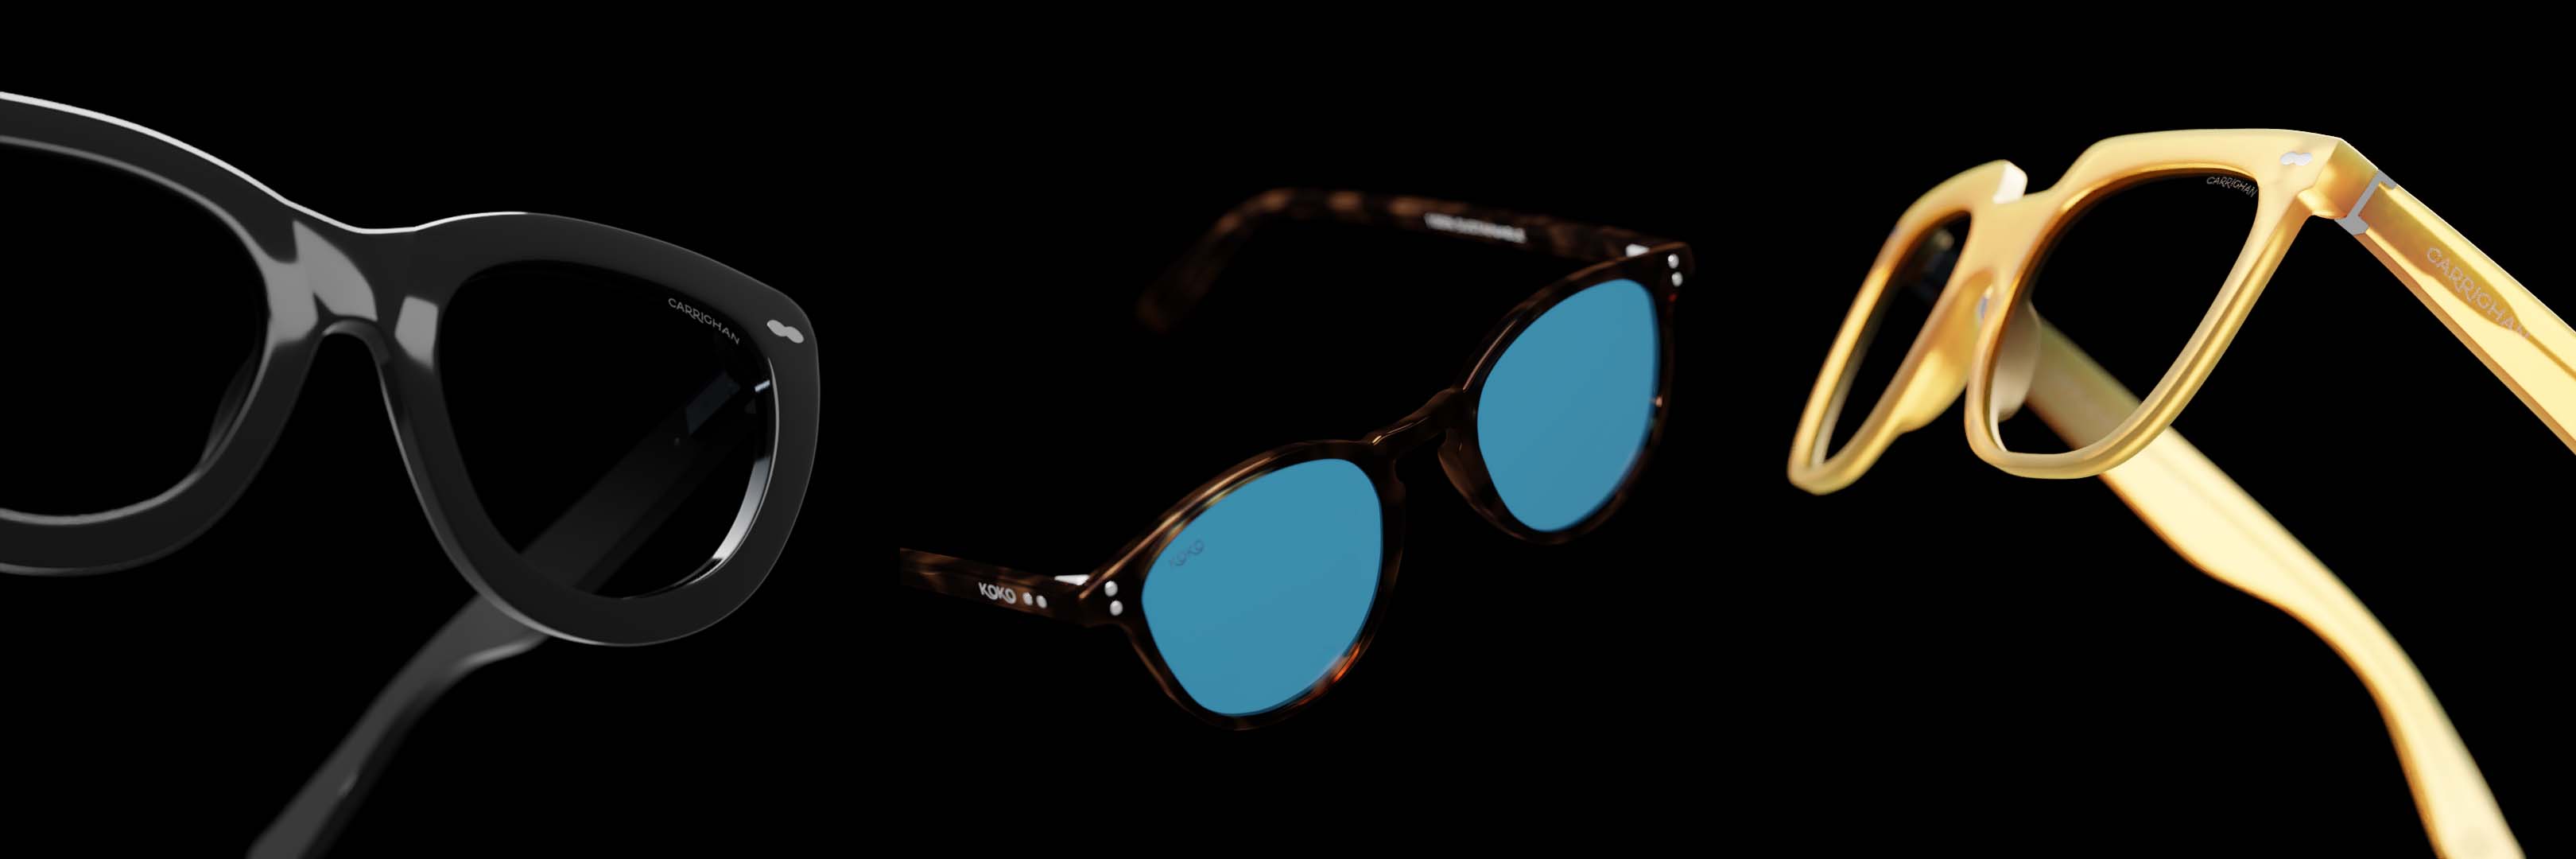 Sunglasses floating over a pitch black background